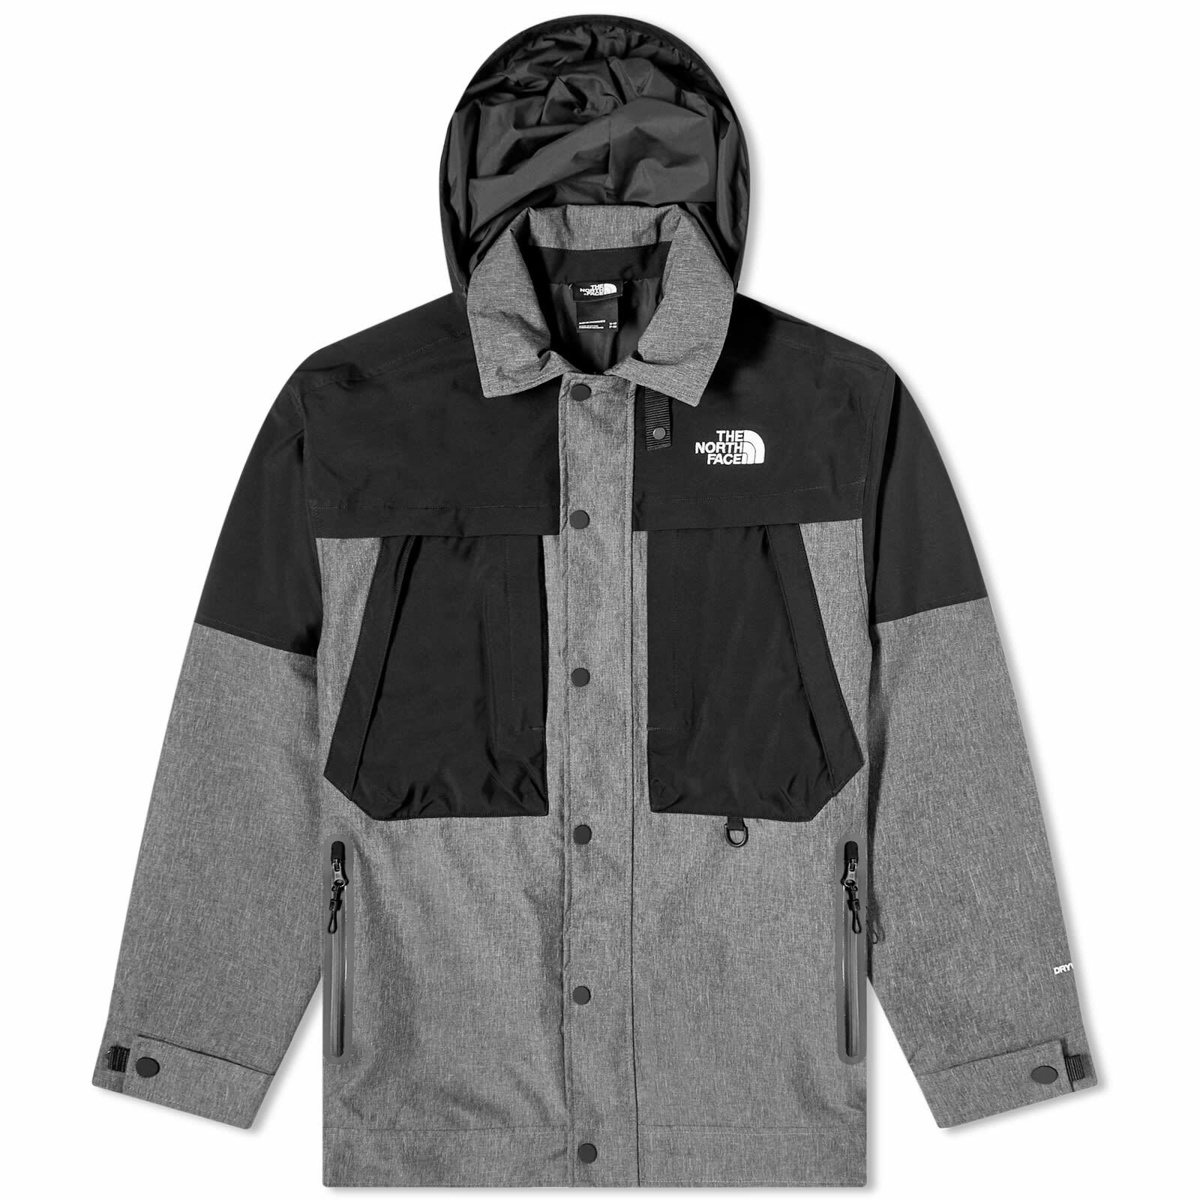 The North Face Series Shelter Jacket The North Face Black Series